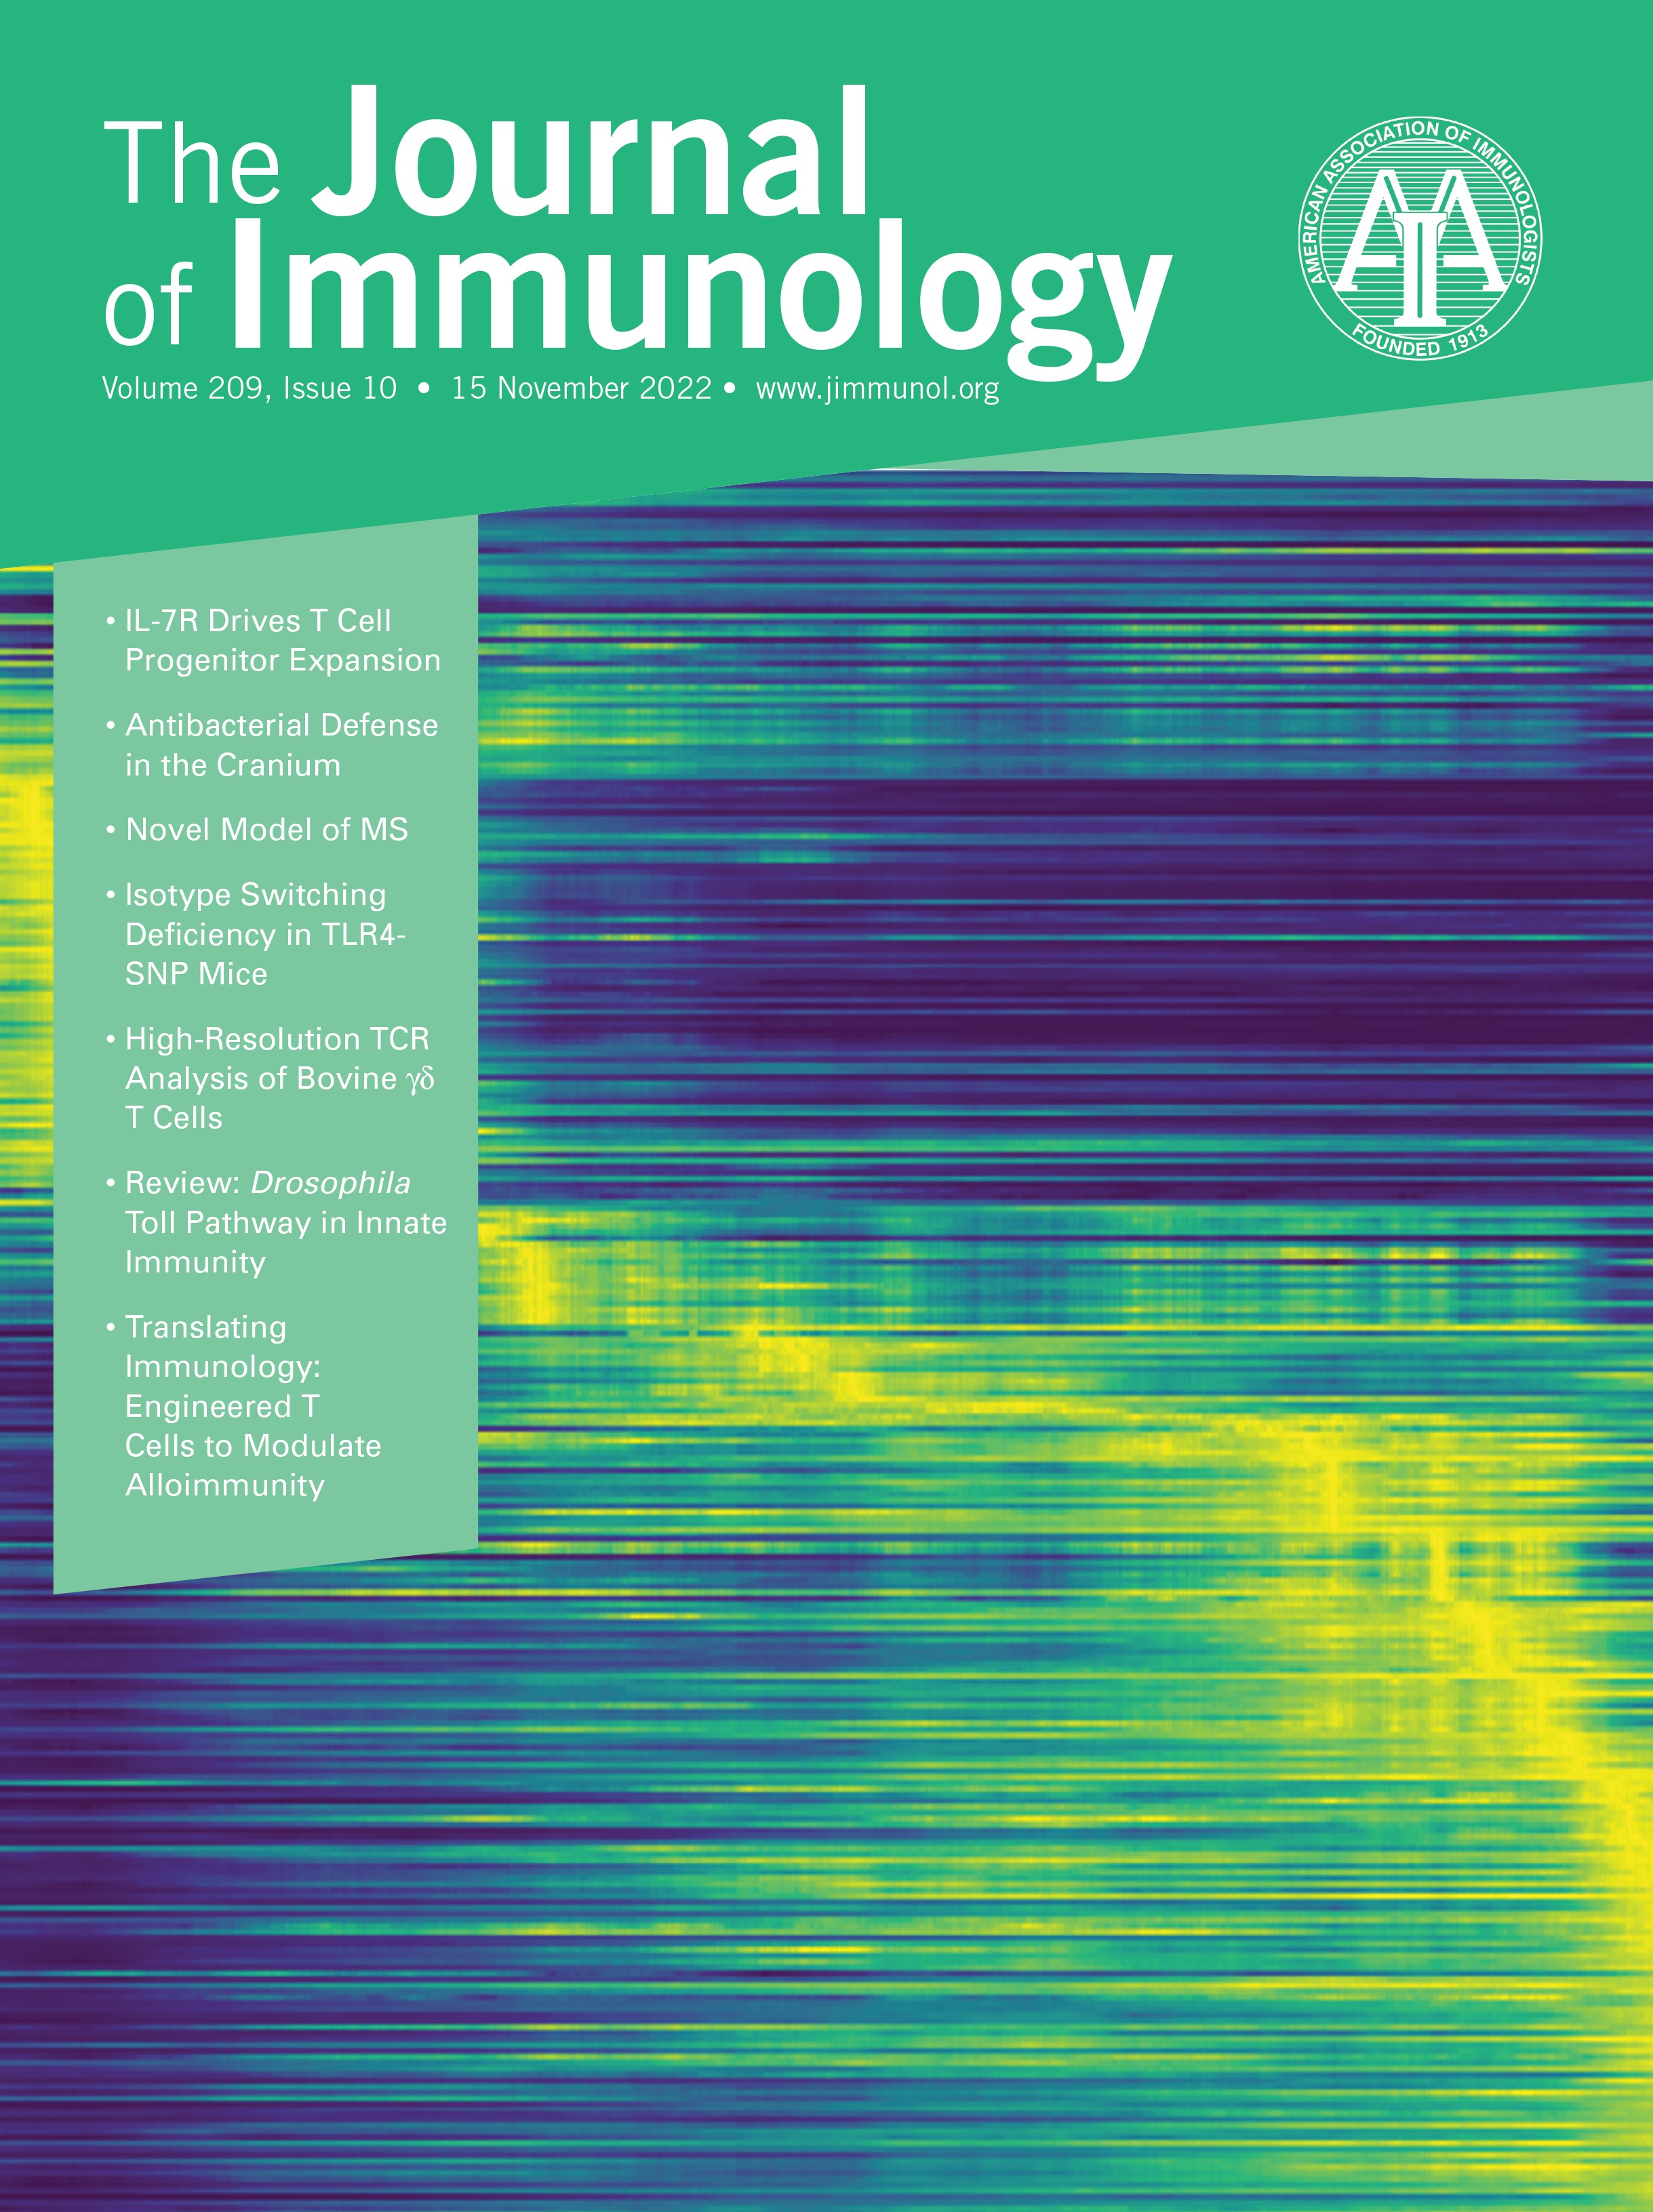 Histamine-Releasing Factor Is a Novel Alarmin Induced by House Dust Mite Allergen, Cytokines, and Cell Death [ALLERGY AND OTHER HYPERSENSITIVITIES]